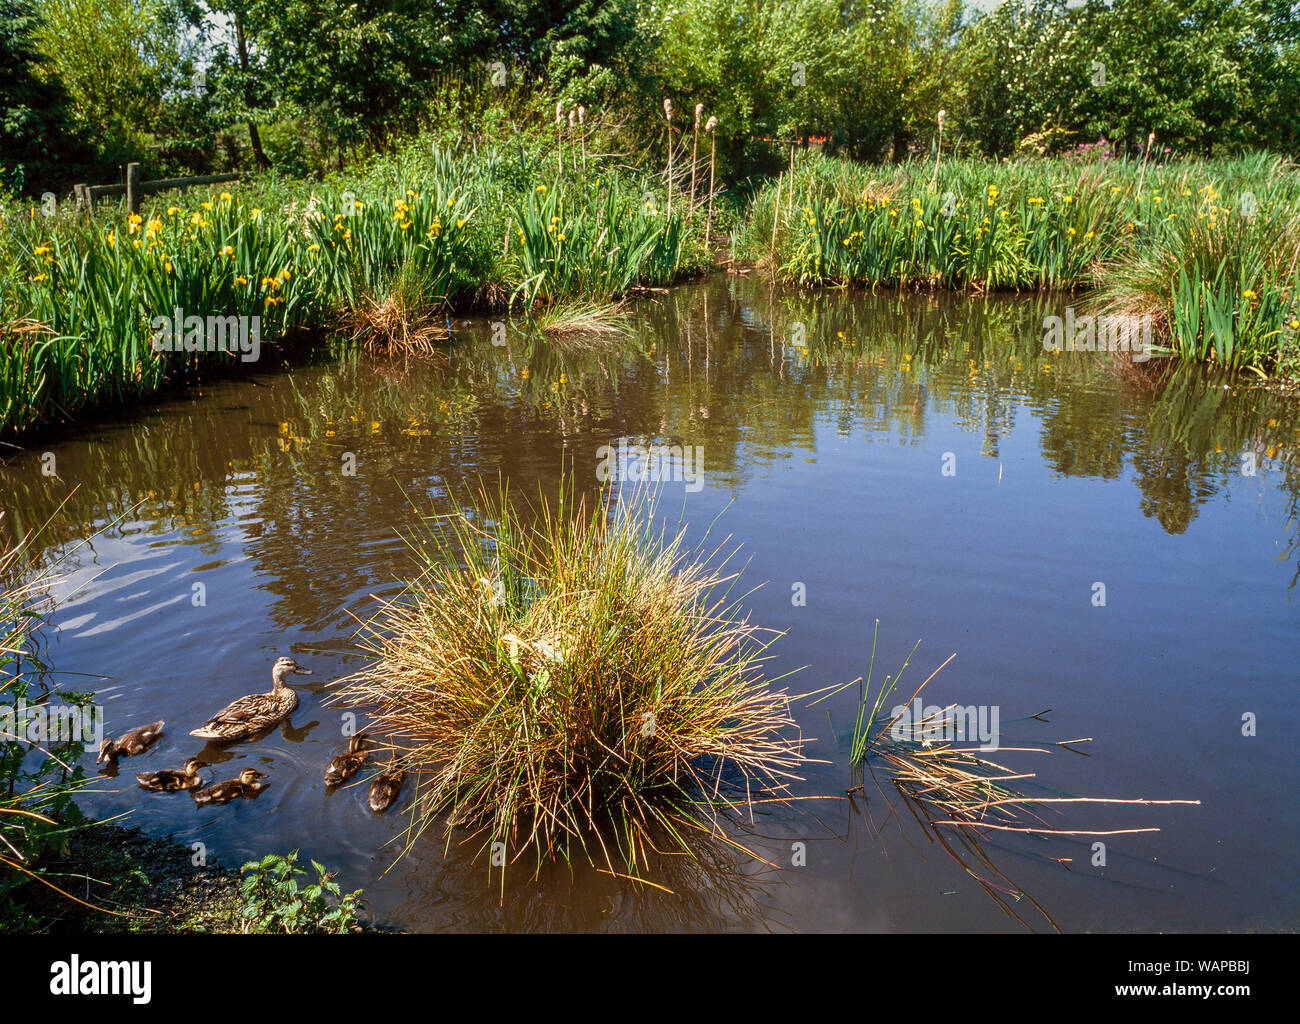 Tranquil duck pond scene, female Mallard with young brood of ducklings, bog plants, Great Reedmace, yellow flag, Martin Mere, Lancs, UK Stock Photo